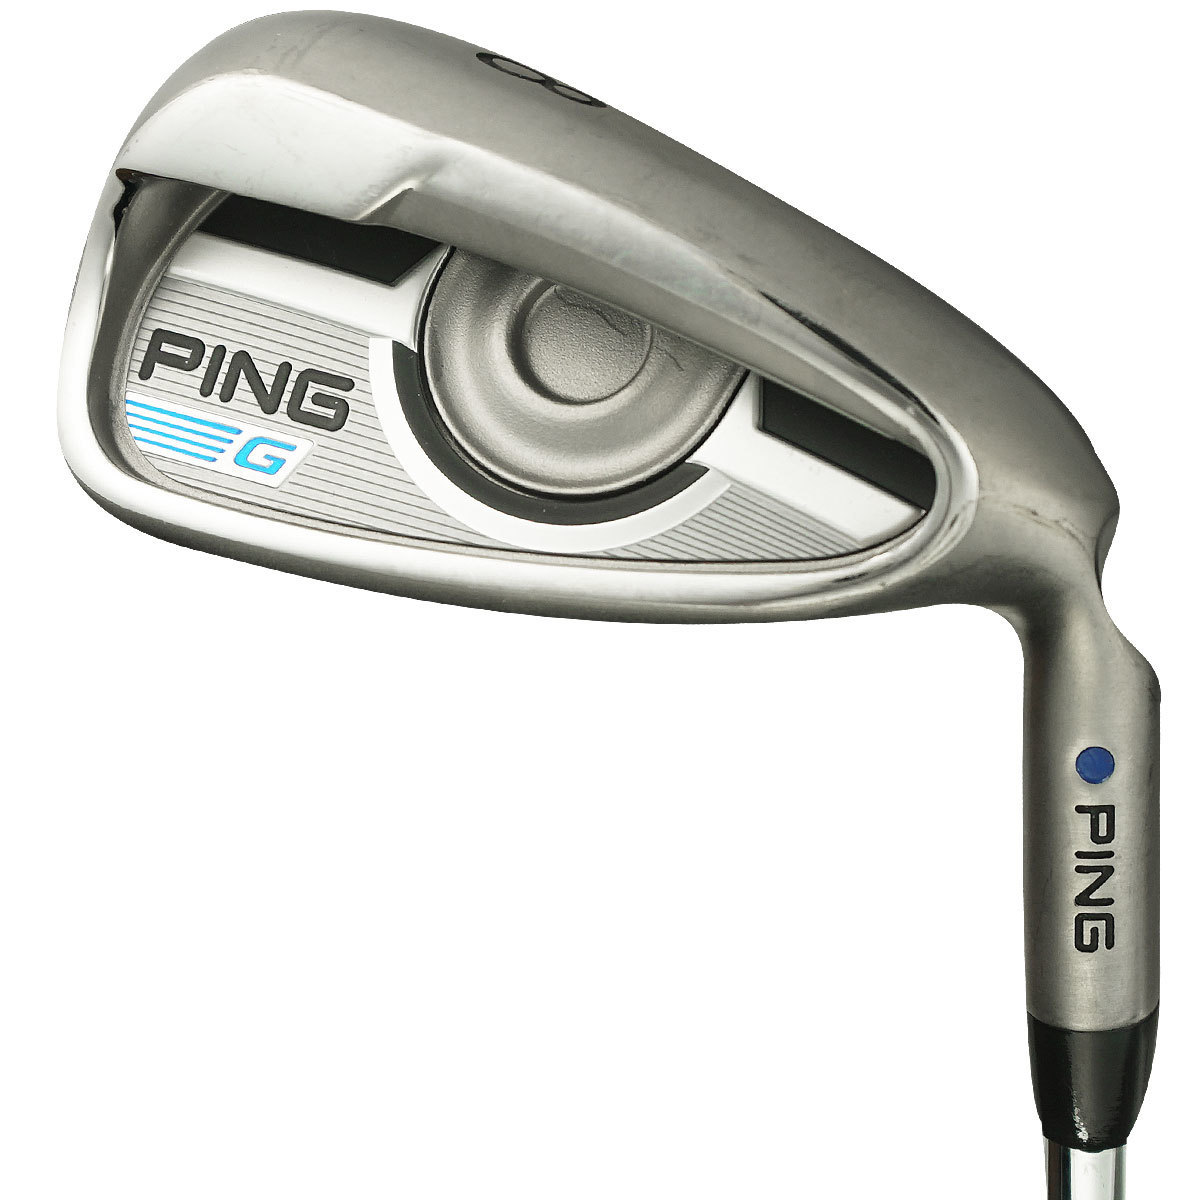 Ping G Le Wedge